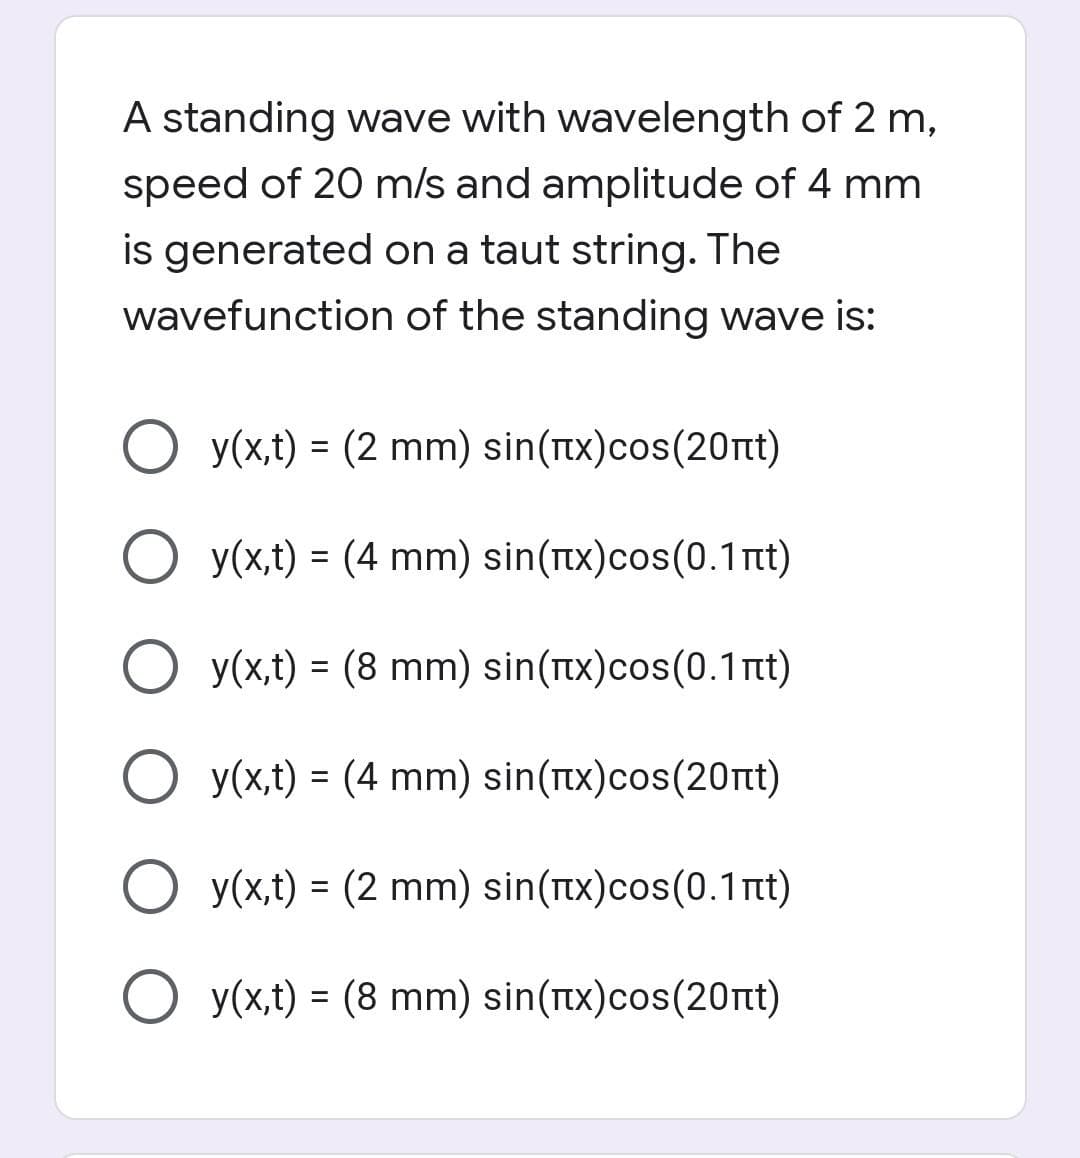 A standing wave with wavelength of 2 m,
speed of 20 m/s and amplitude of 4 mm
is generated on a taut string. The
wavefunction of the standing wave is:
O y(x,t) = (2 mm) sin(Tx)cos(20rnt)
O y(x,t) = (4 mm) sin(tx)cos(0.1nt)
y(x,t) = (8 mm) sin(x)cos(0.1nt)
O y(x,t) = (4 mm) sin(tx)cos(20nt)
y(x,t) = (2 mm) sin(tx)cos(0.1 t)
O y(x,t) = (8 mm) sin(tx)cos(20nt)
